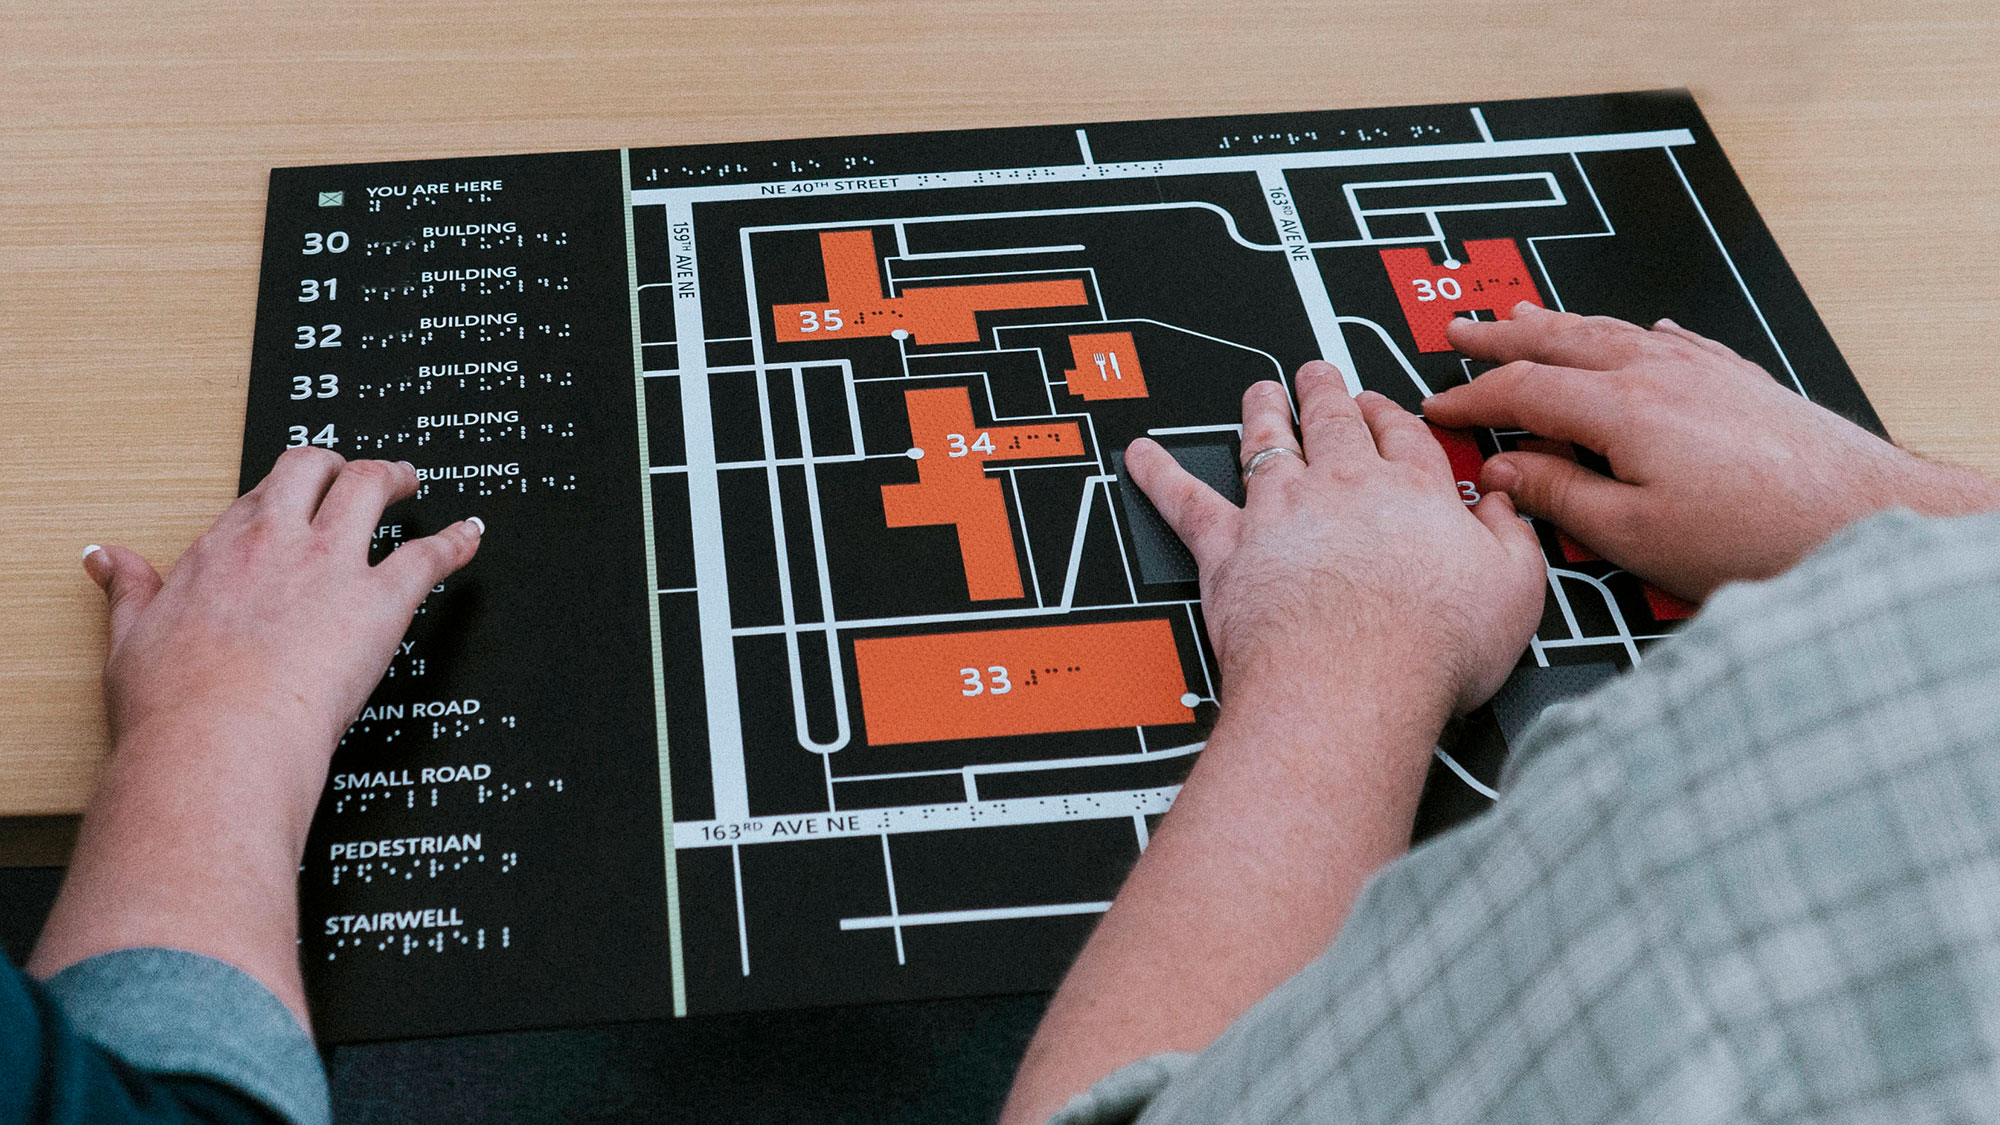 Two people use their hands to navigate a campus using a tactile map.